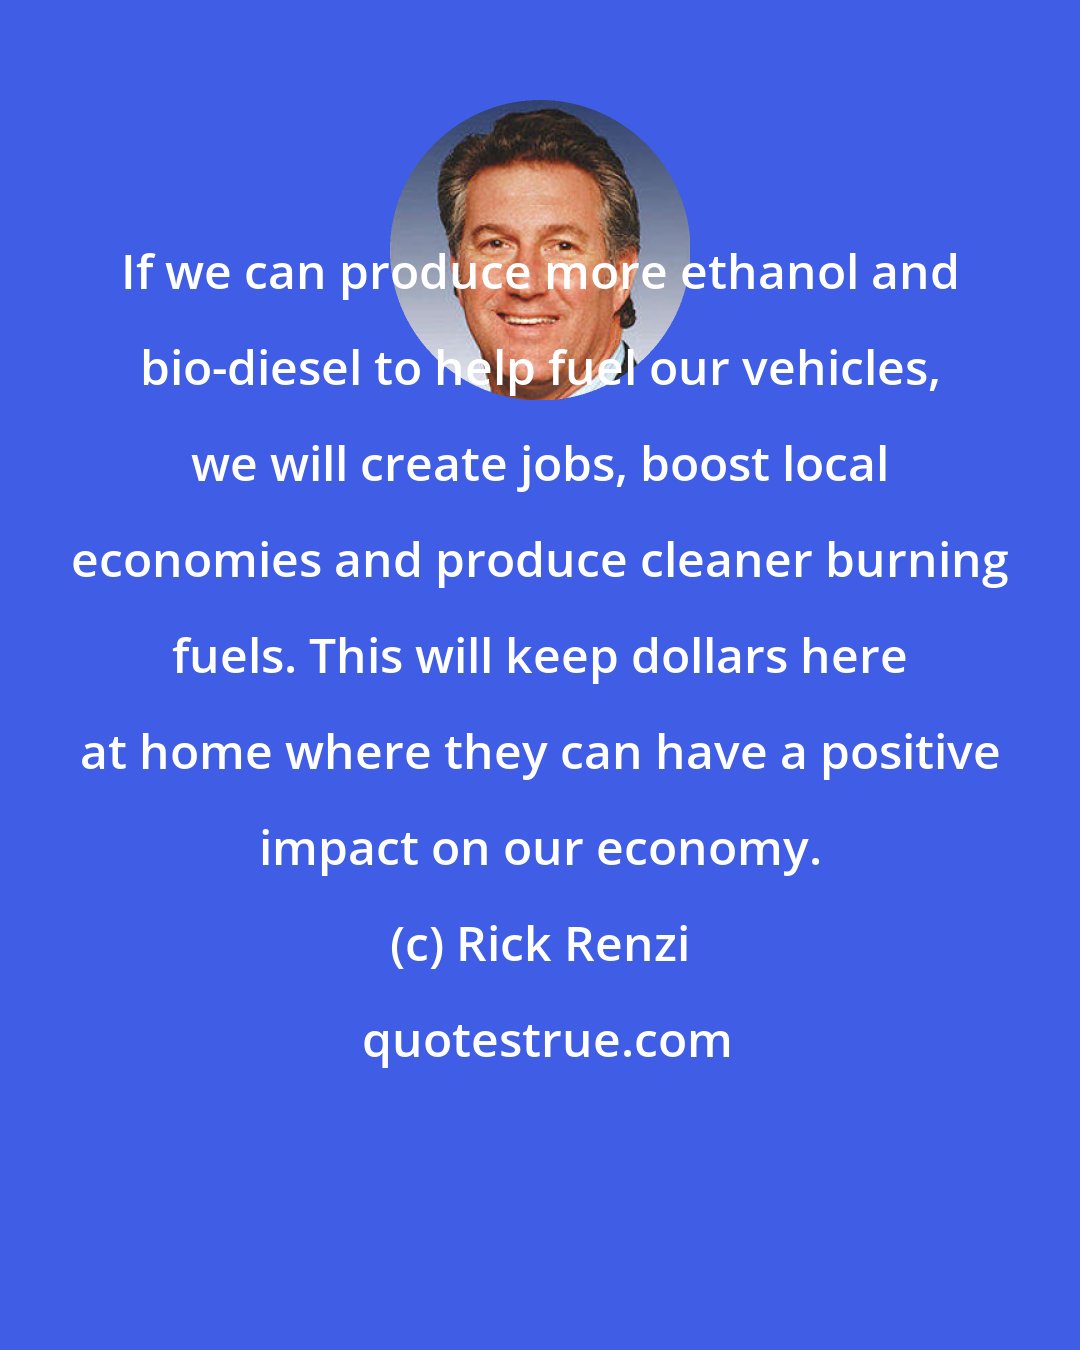 Rick Renzi: If we can produce more ethanol and bio-diesel to help fuel our vehicles, we will create jobs, boost local economies and produce cleaner burning fuels. This will keep dollars here at home where they can have a positive impact on our economy.